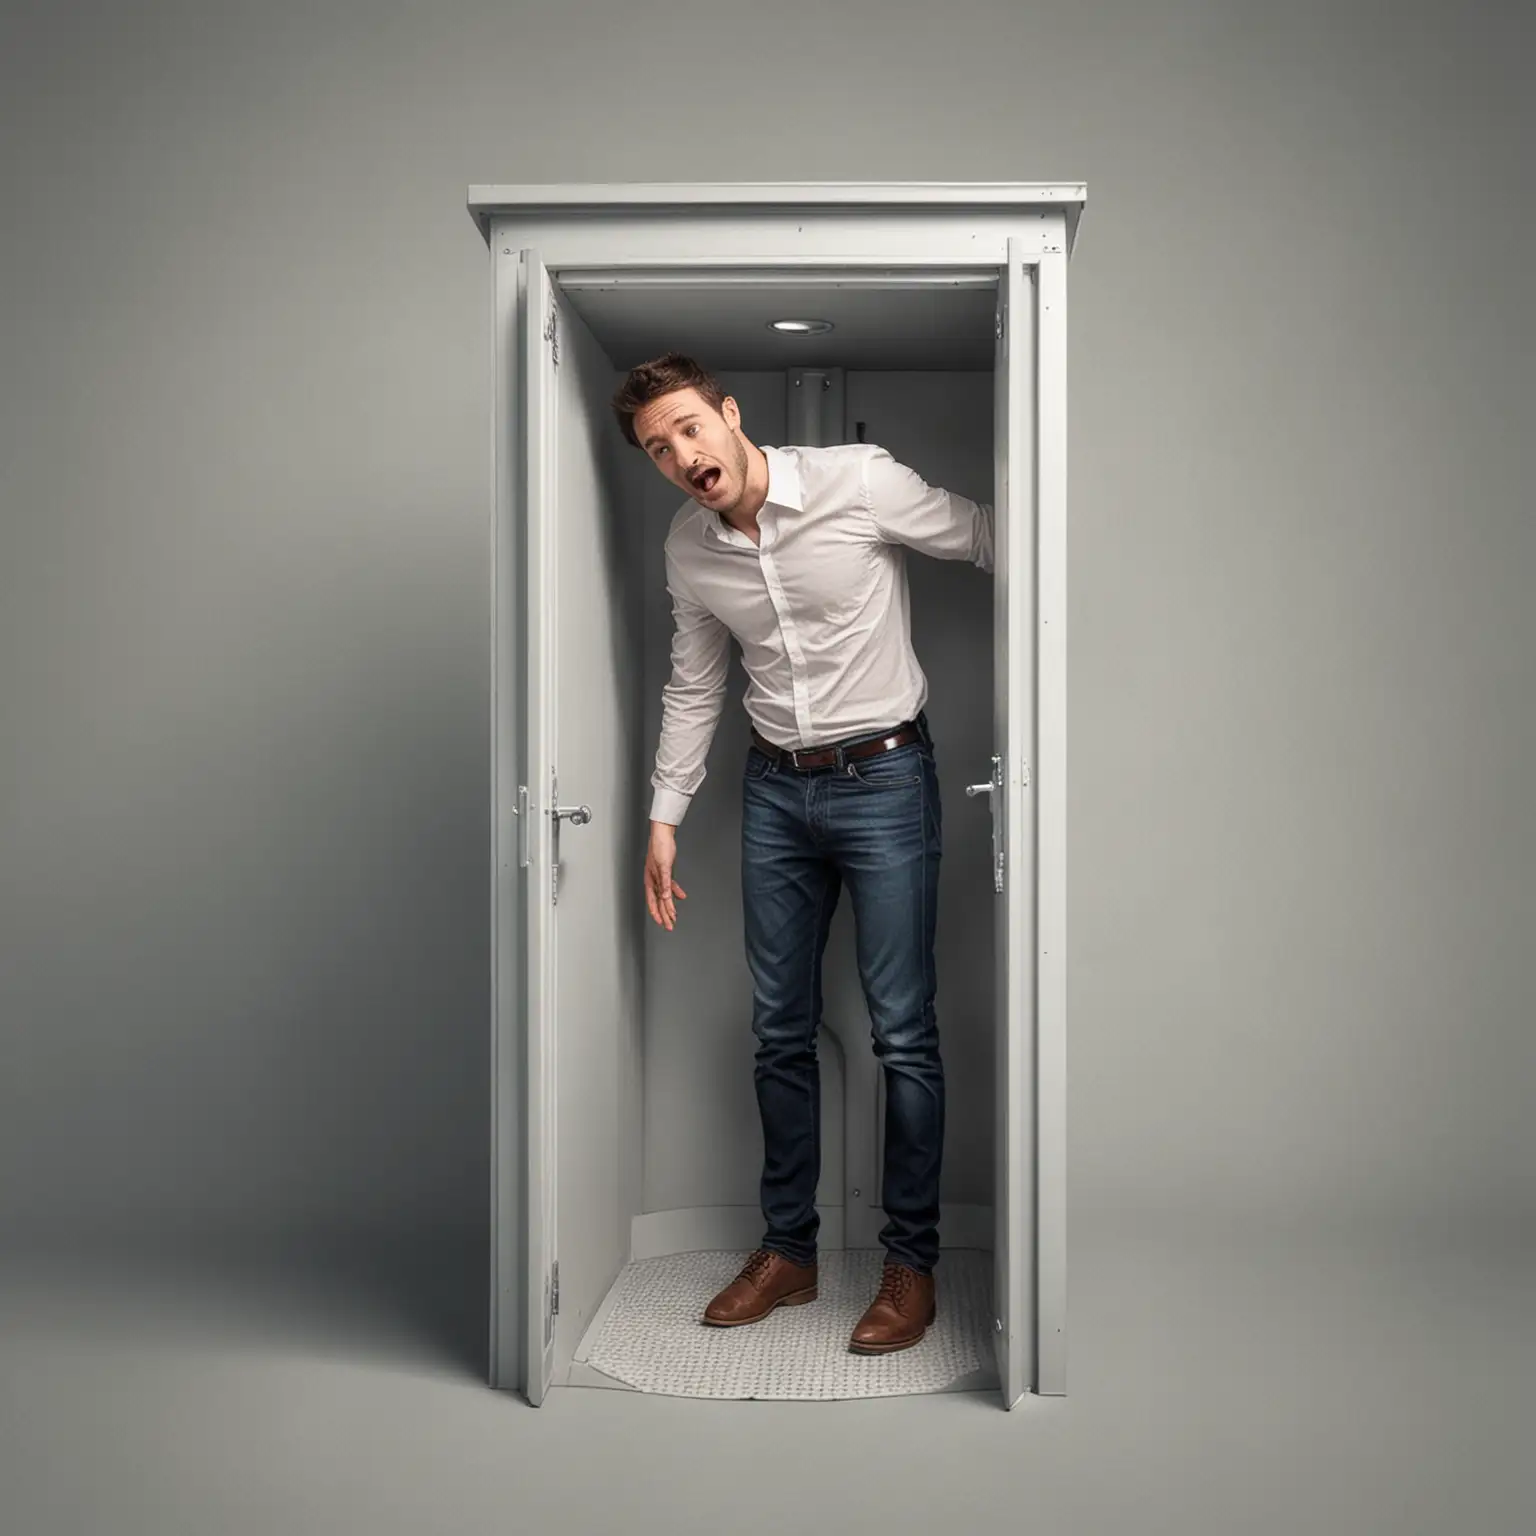 make a realistic photo of a man standing in a small toilet booth and celing is touching his had 